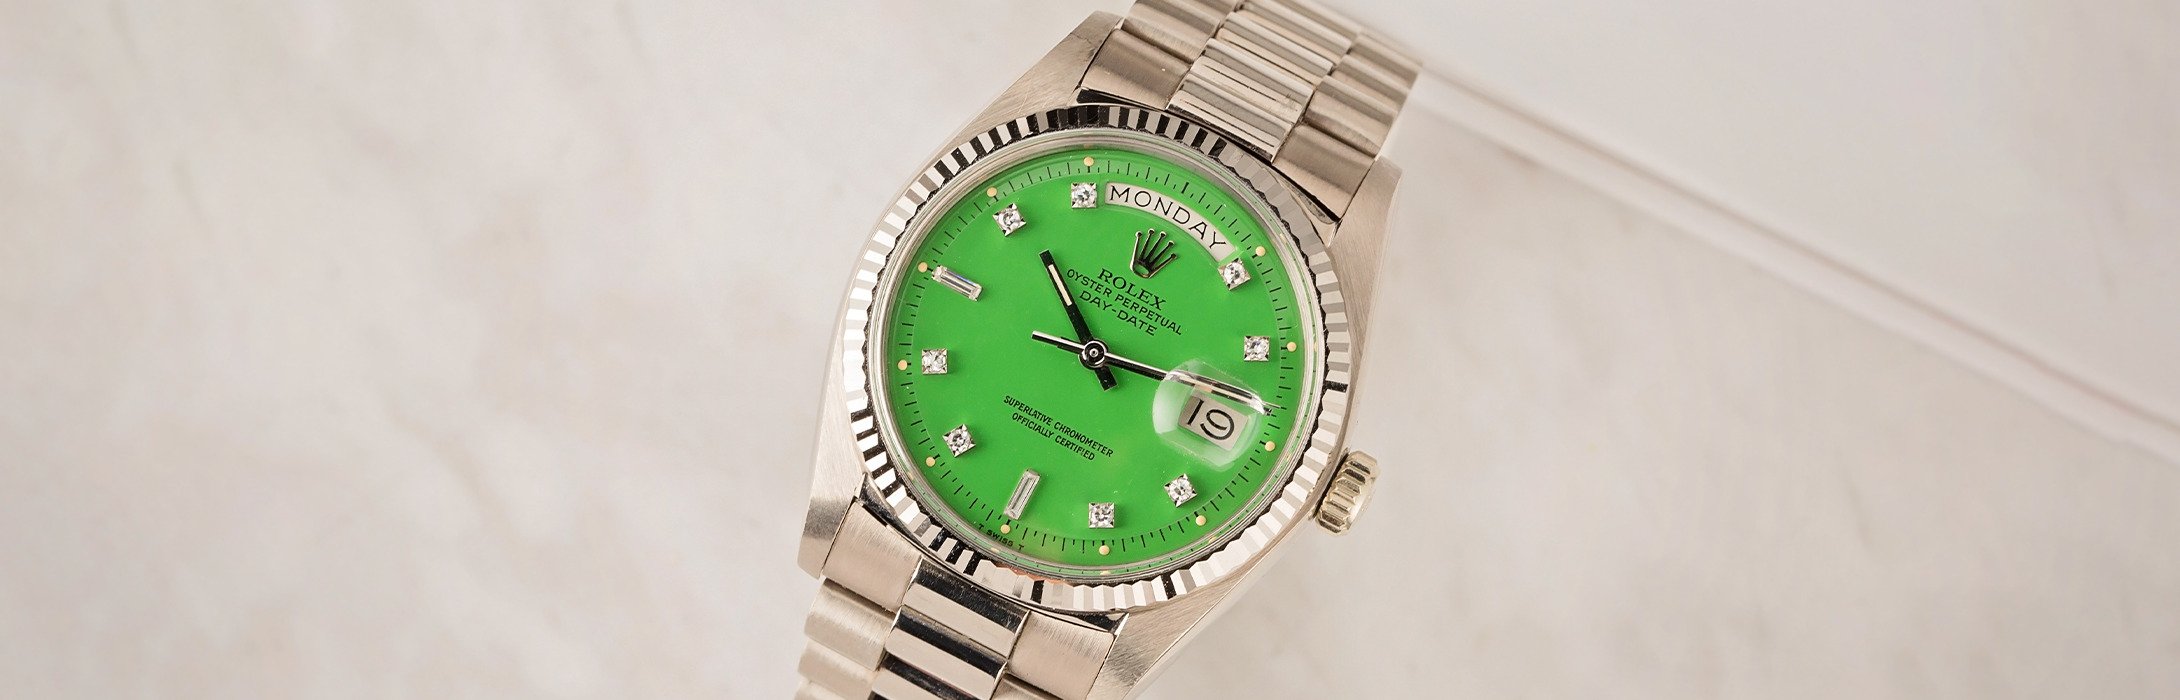 Rolex Day-Date Green Dial Watches